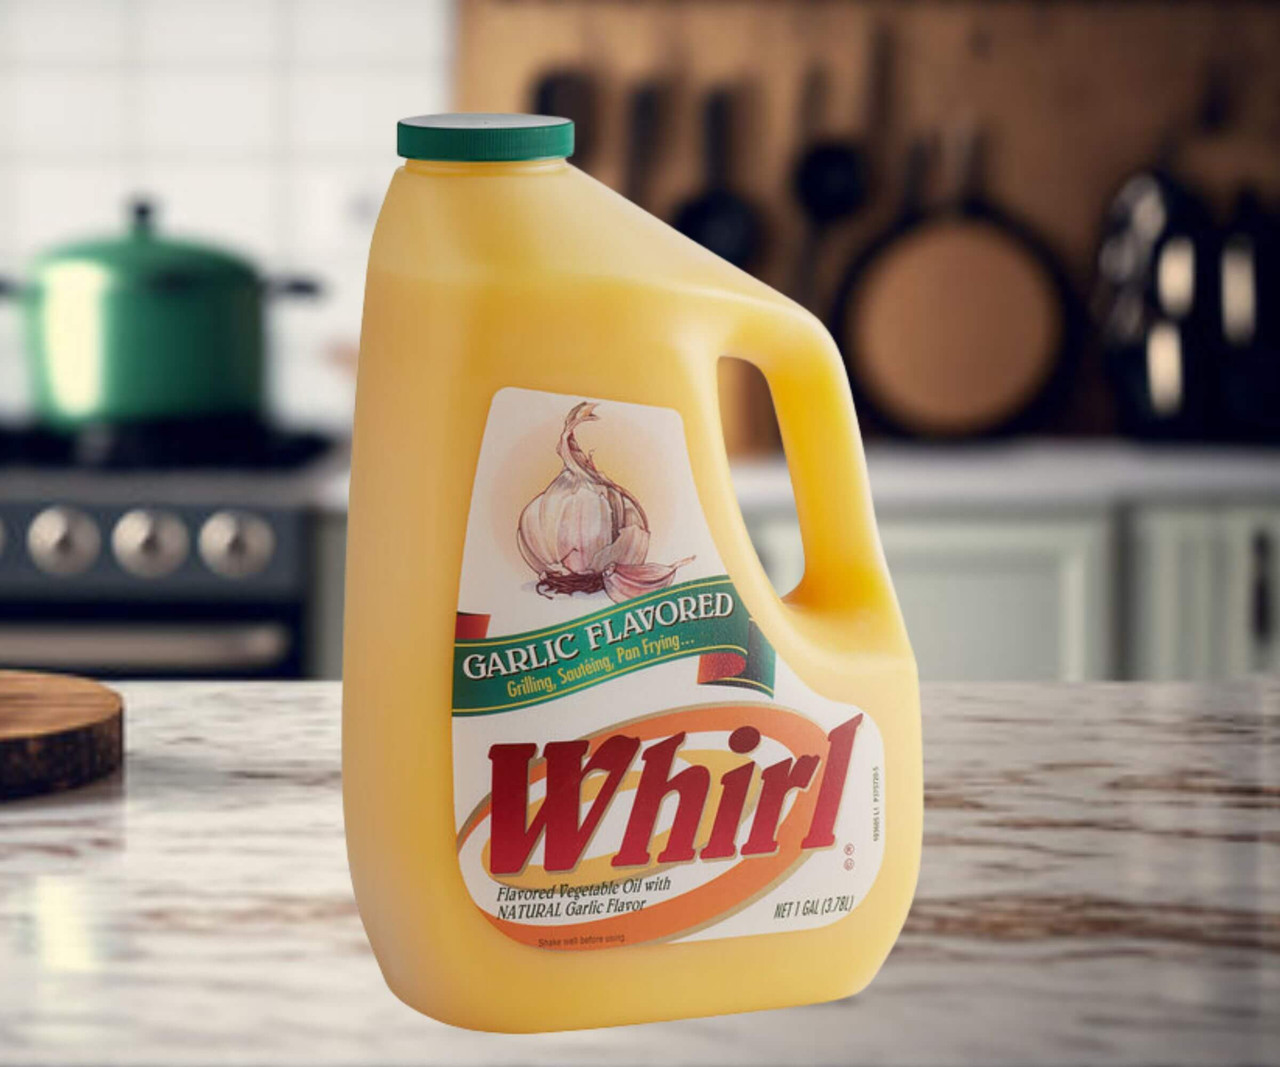 Garlic Whirl Butter-Flavored Oil, 1 Gallon